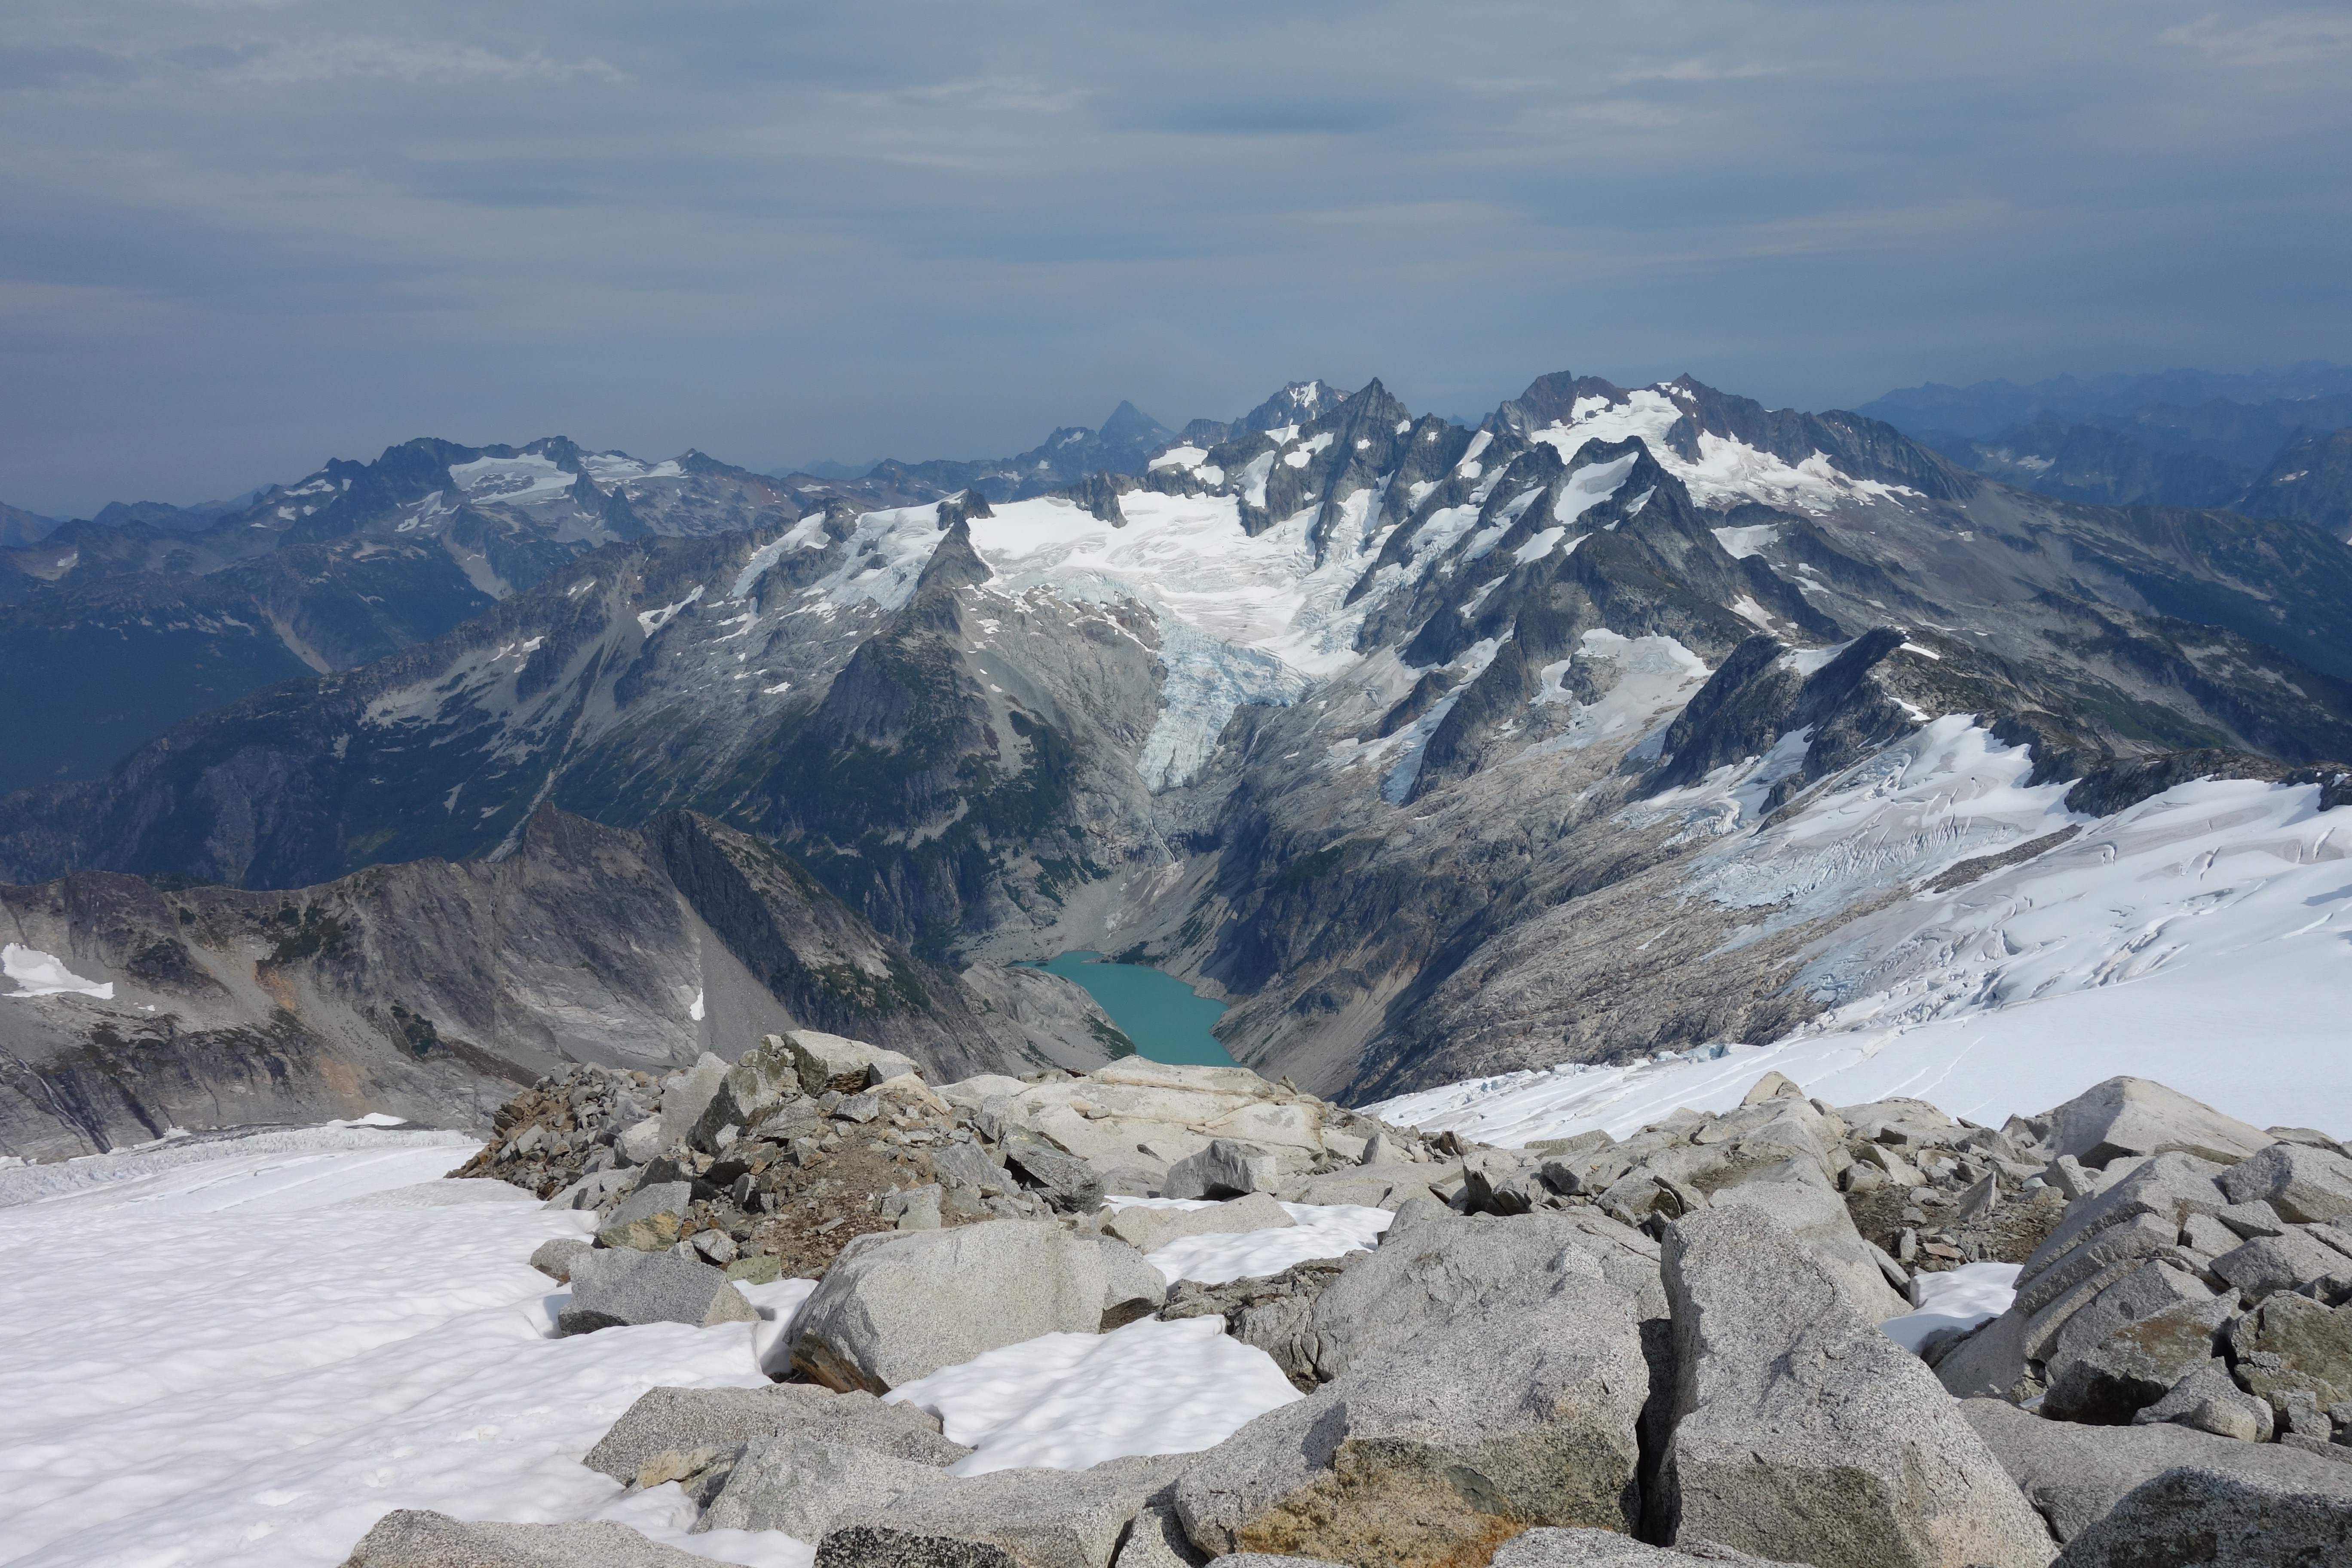 Jagged mountain peaks give way to glaciers.